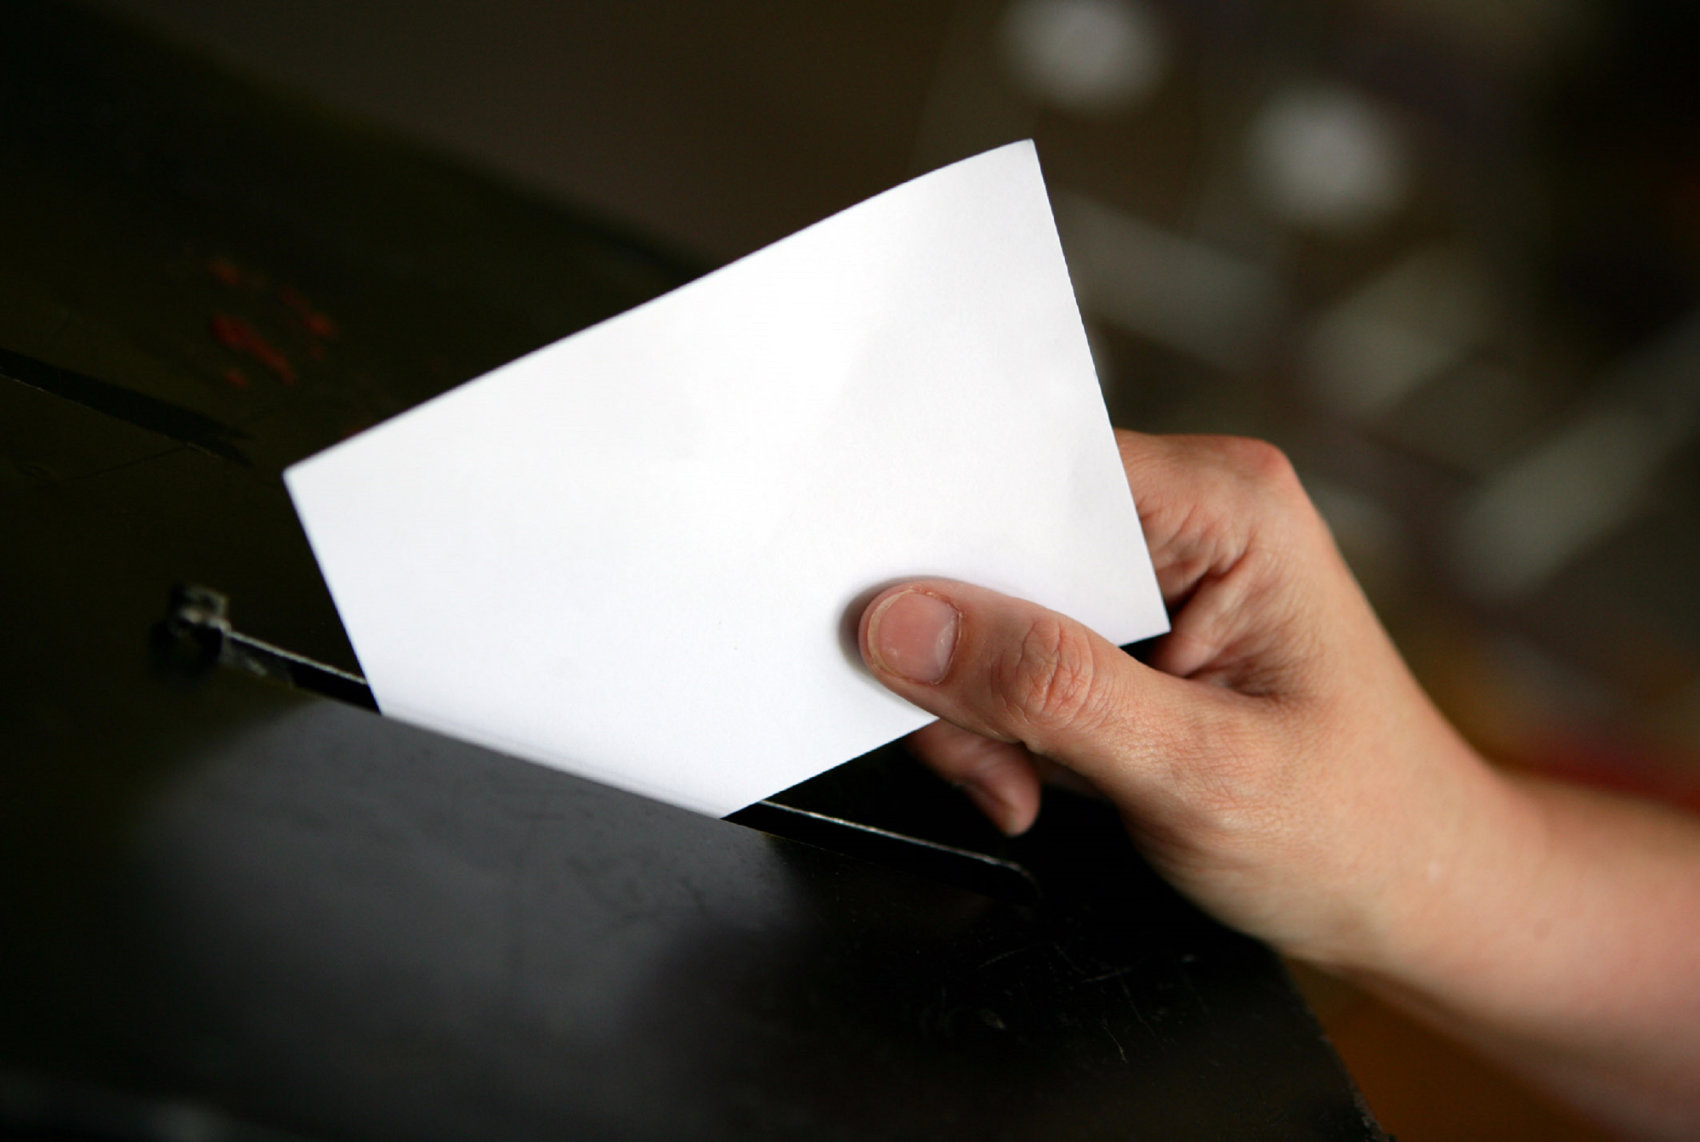 The review of polling districts and places has started across North Yorkshire